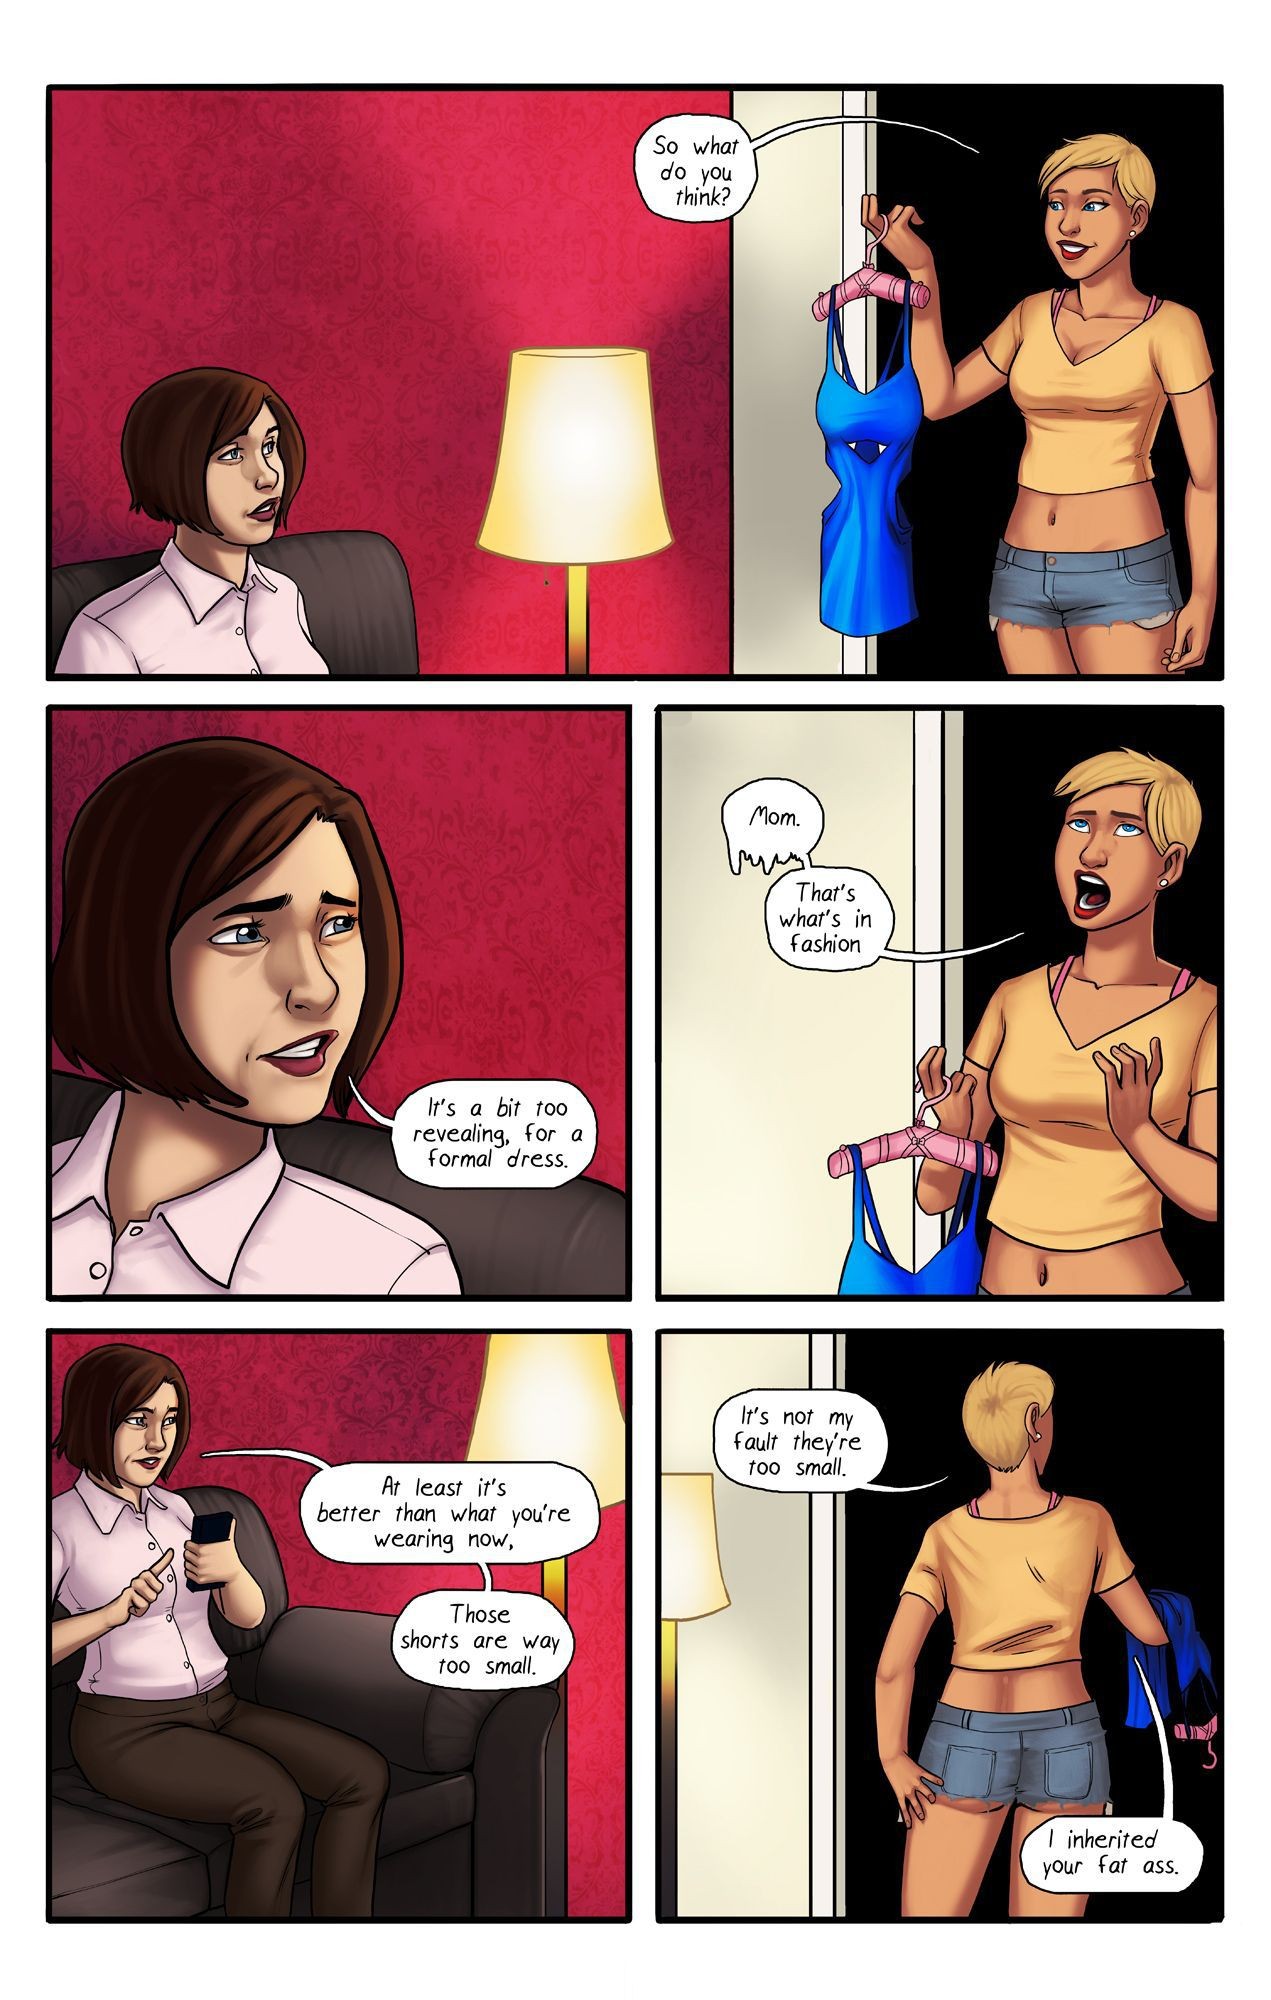 Trimmed [Olympic-Dames] Alien Pregnancy Expansion Comic Updated (Ongoing) Anal Creampie